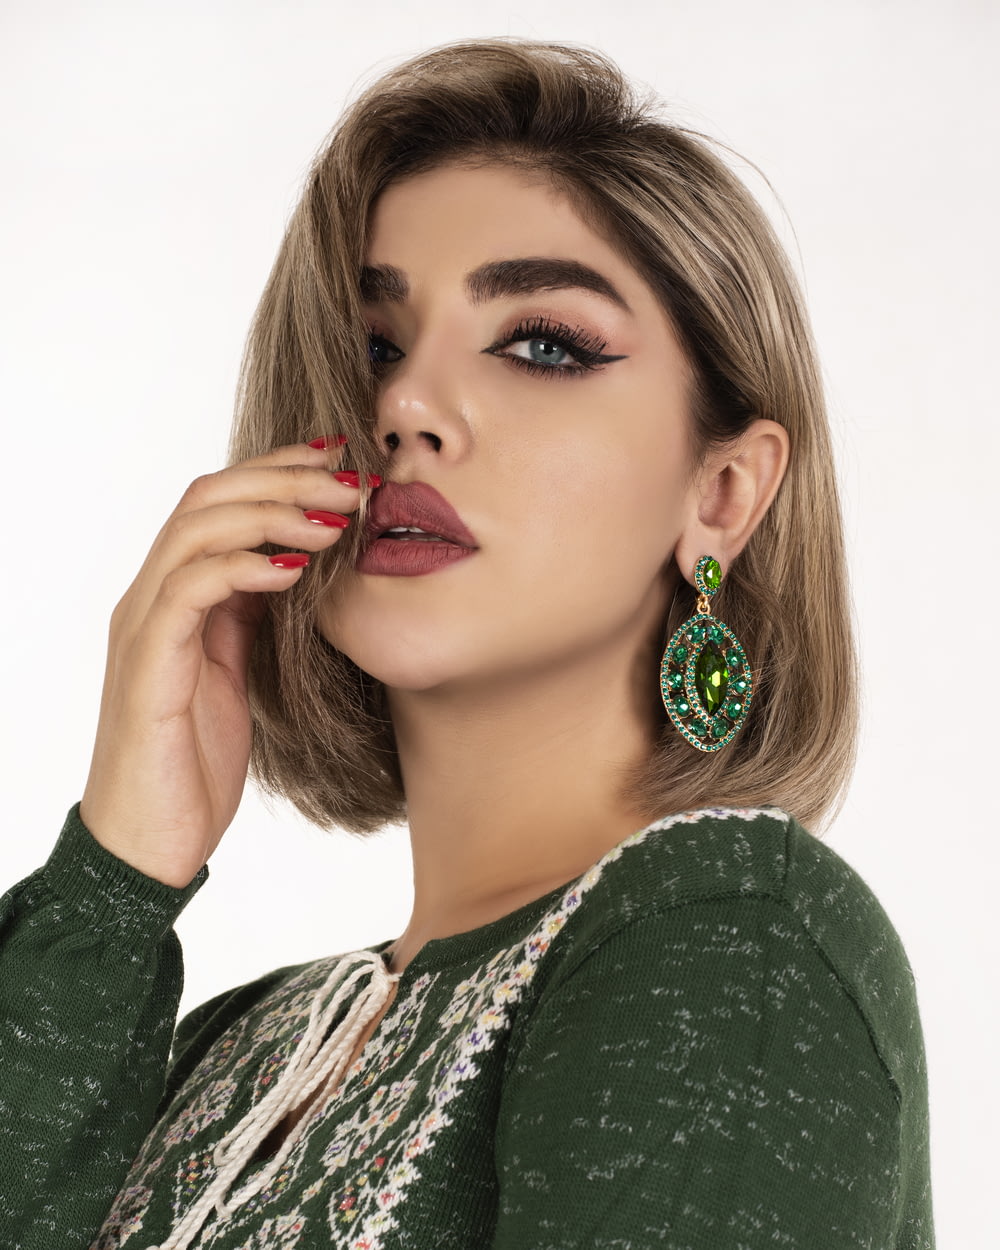 a woman with a green sweater and earrings